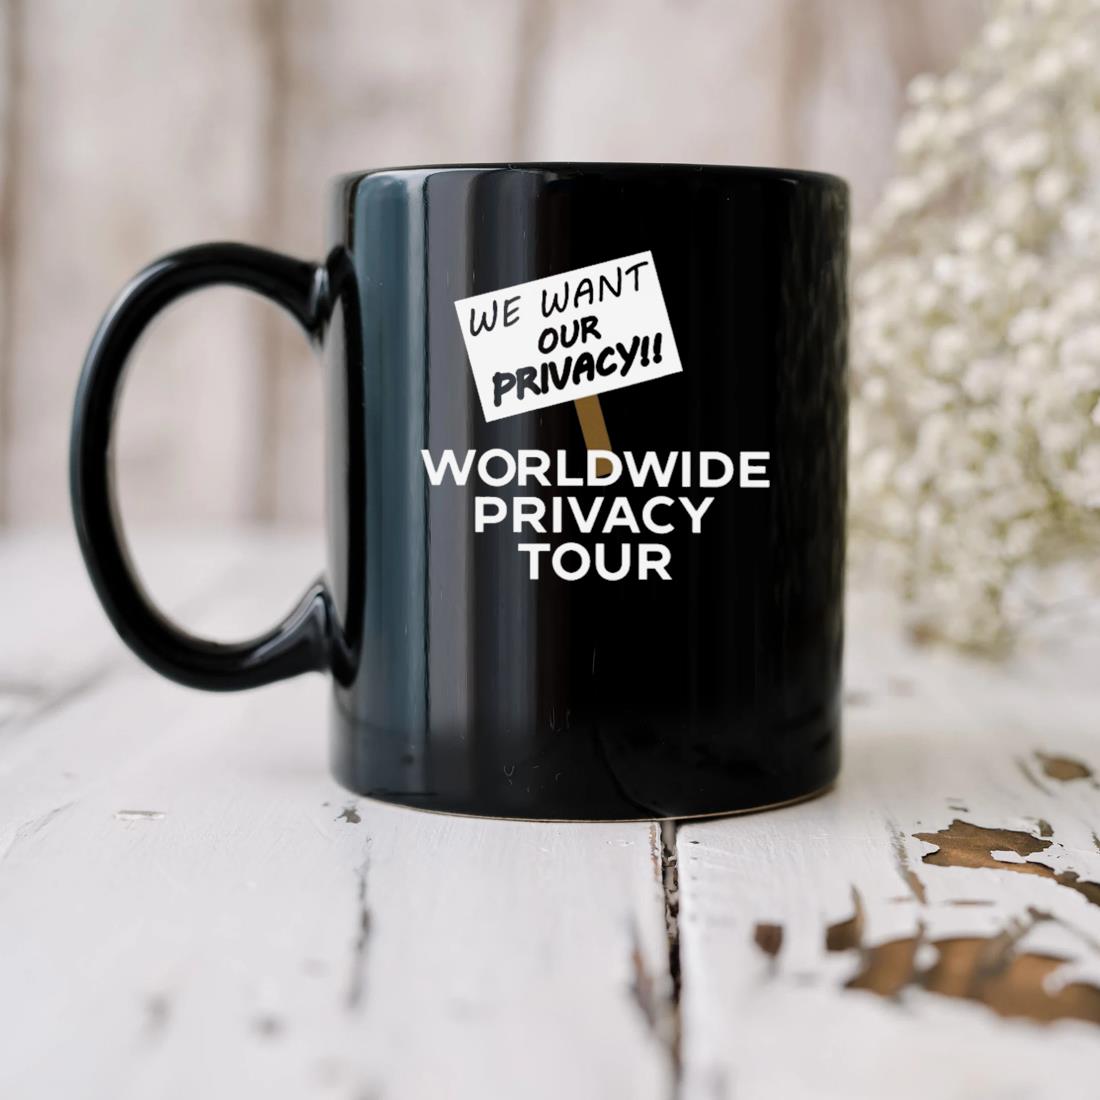 We Want Our Privacy Worldwide Privacy Tour Mug